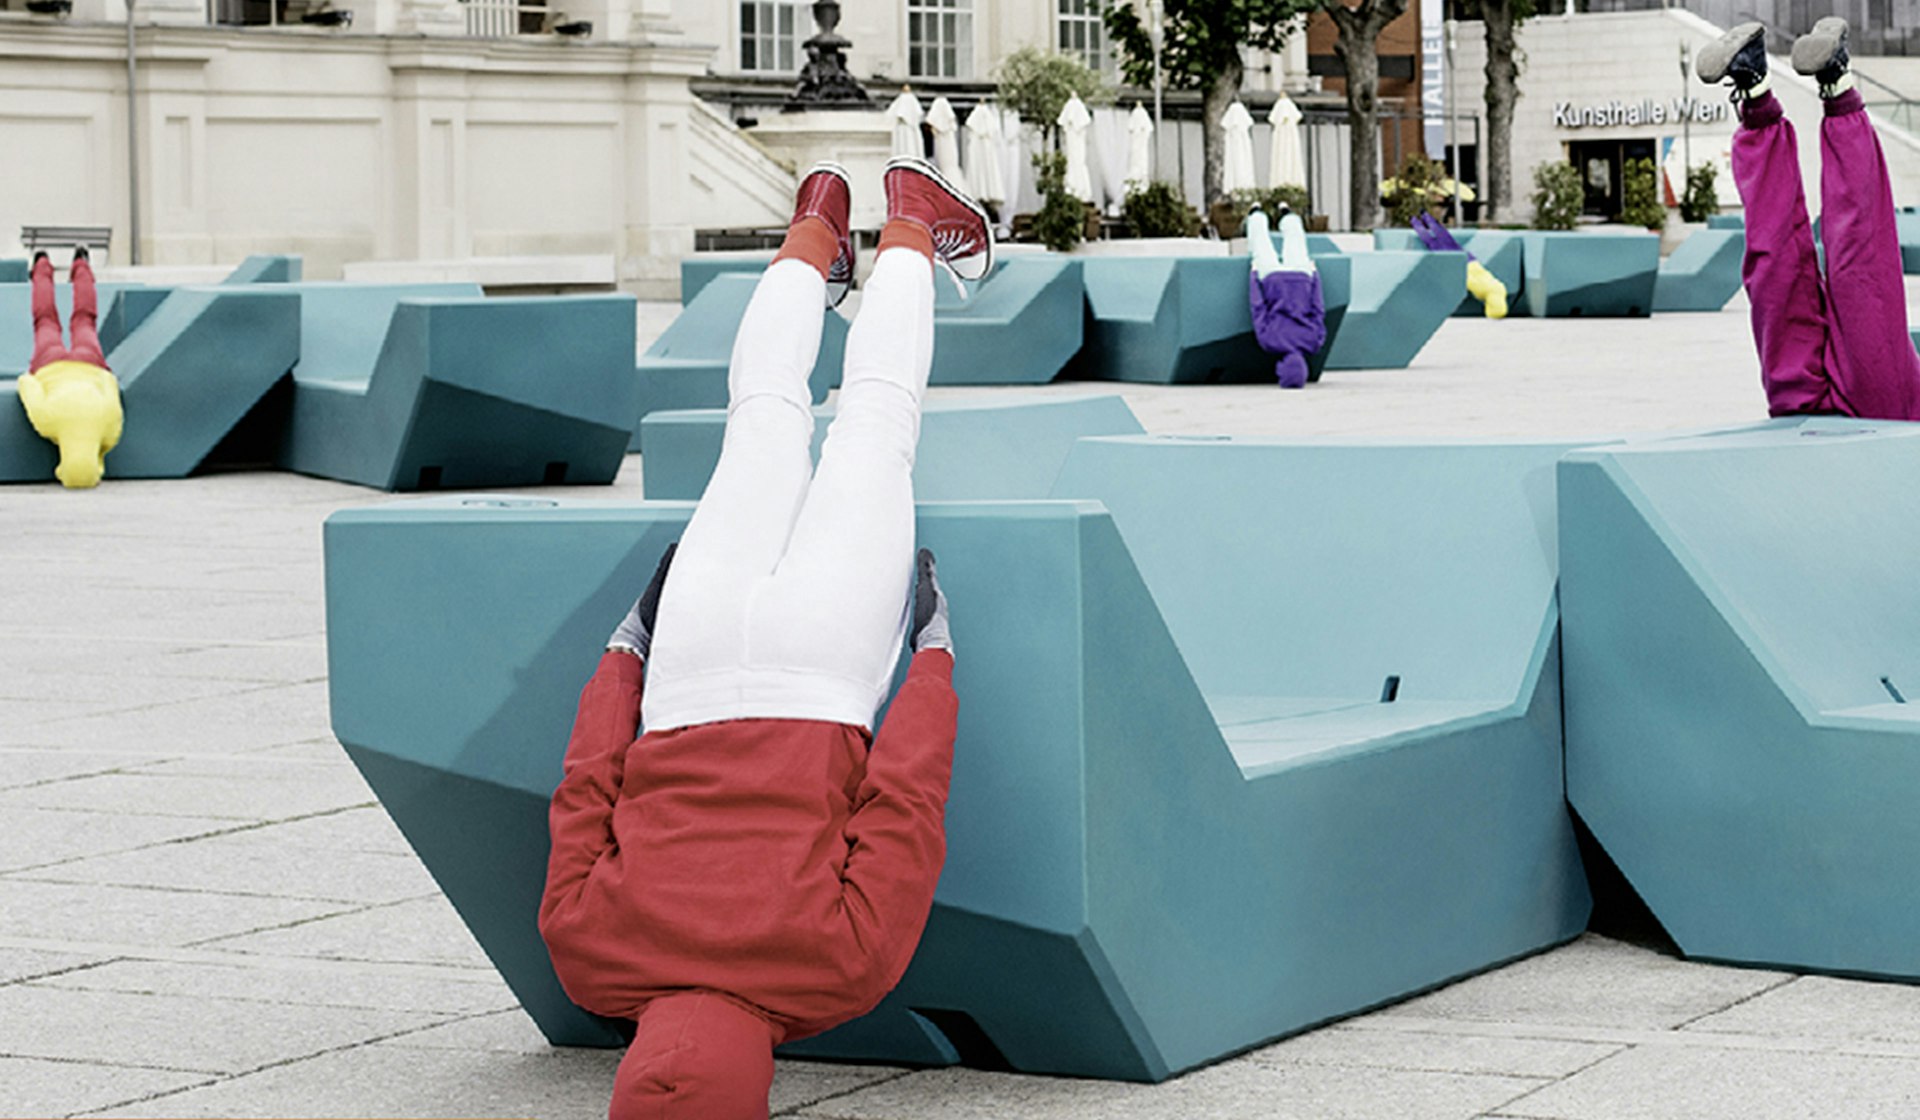 The artist stacking people into urban spaces to provoke a rethink of city life